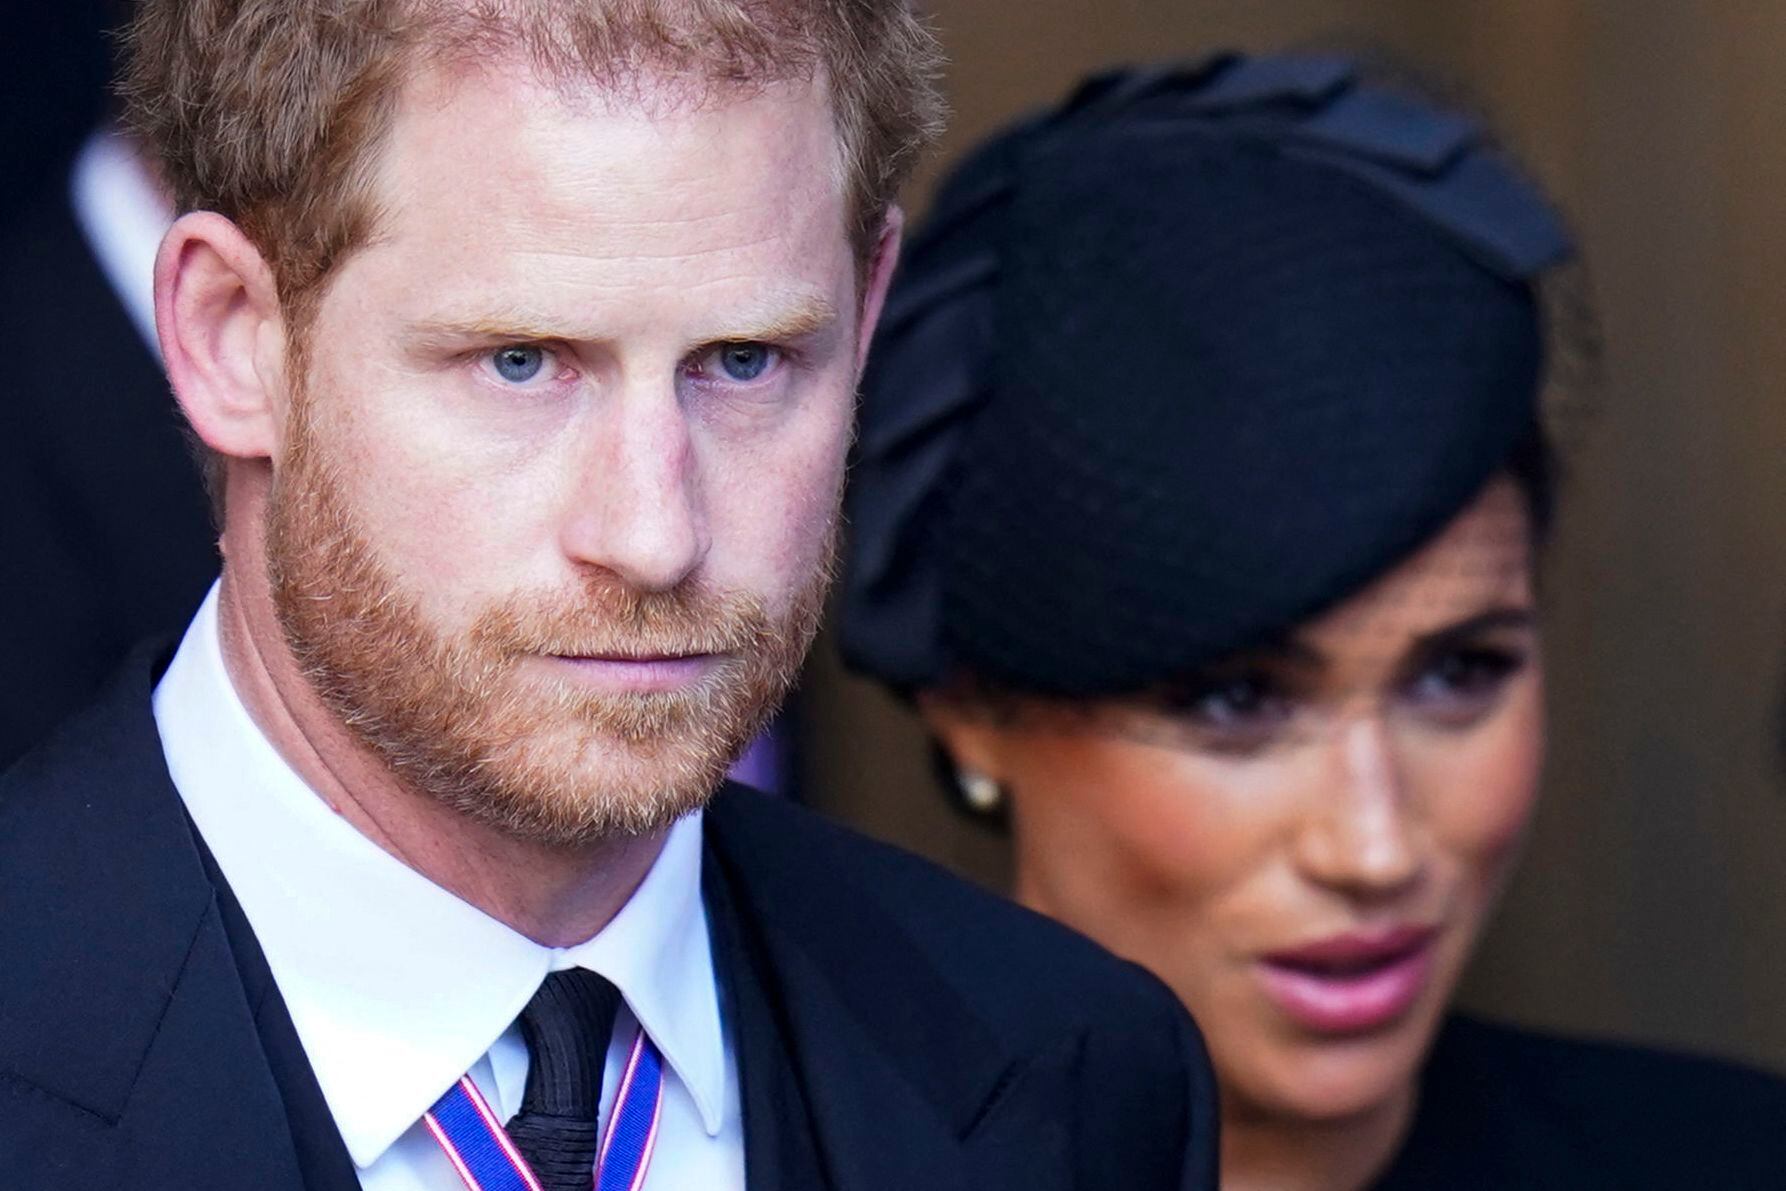 Prince Harry and his wife Meghan Markle leave after a service for the reception of Queen Elizabeth II's coffin in Westminster Hall at the Palace of Westminster on September 14, 2022. (Photo by Danny Lawson/AFP)